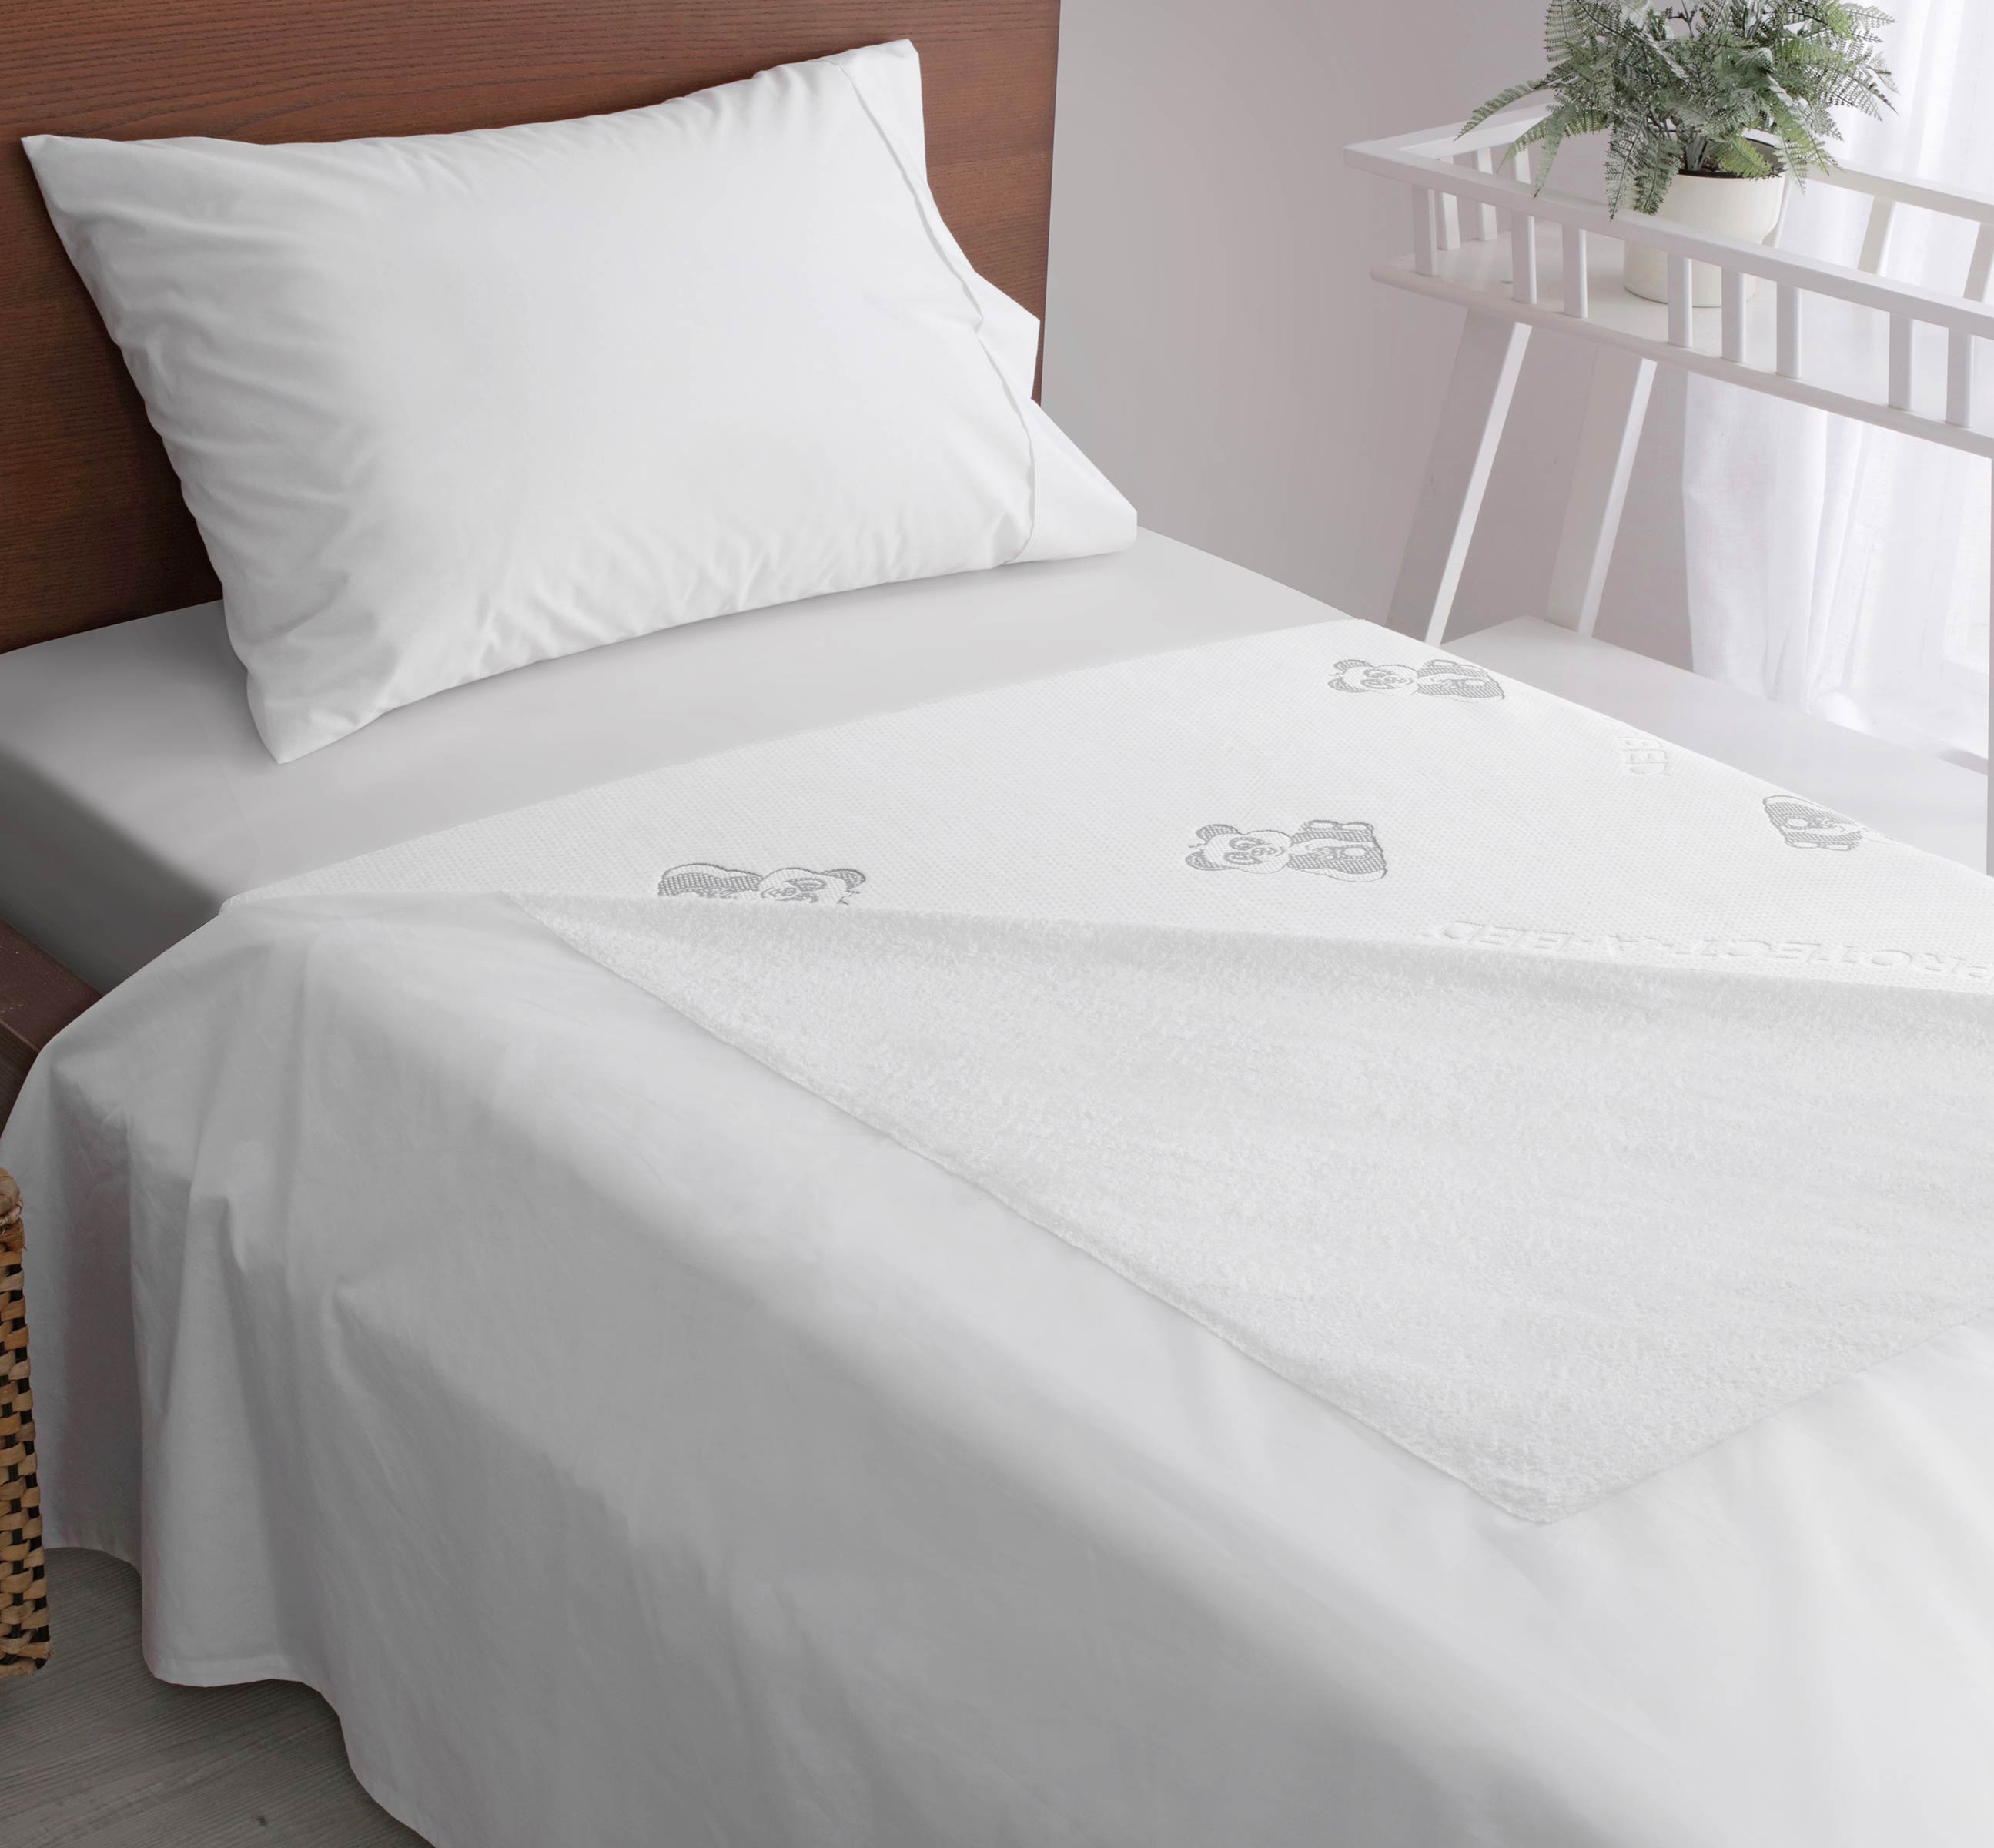 Linen Saver Bed Pad With Tuck Ins